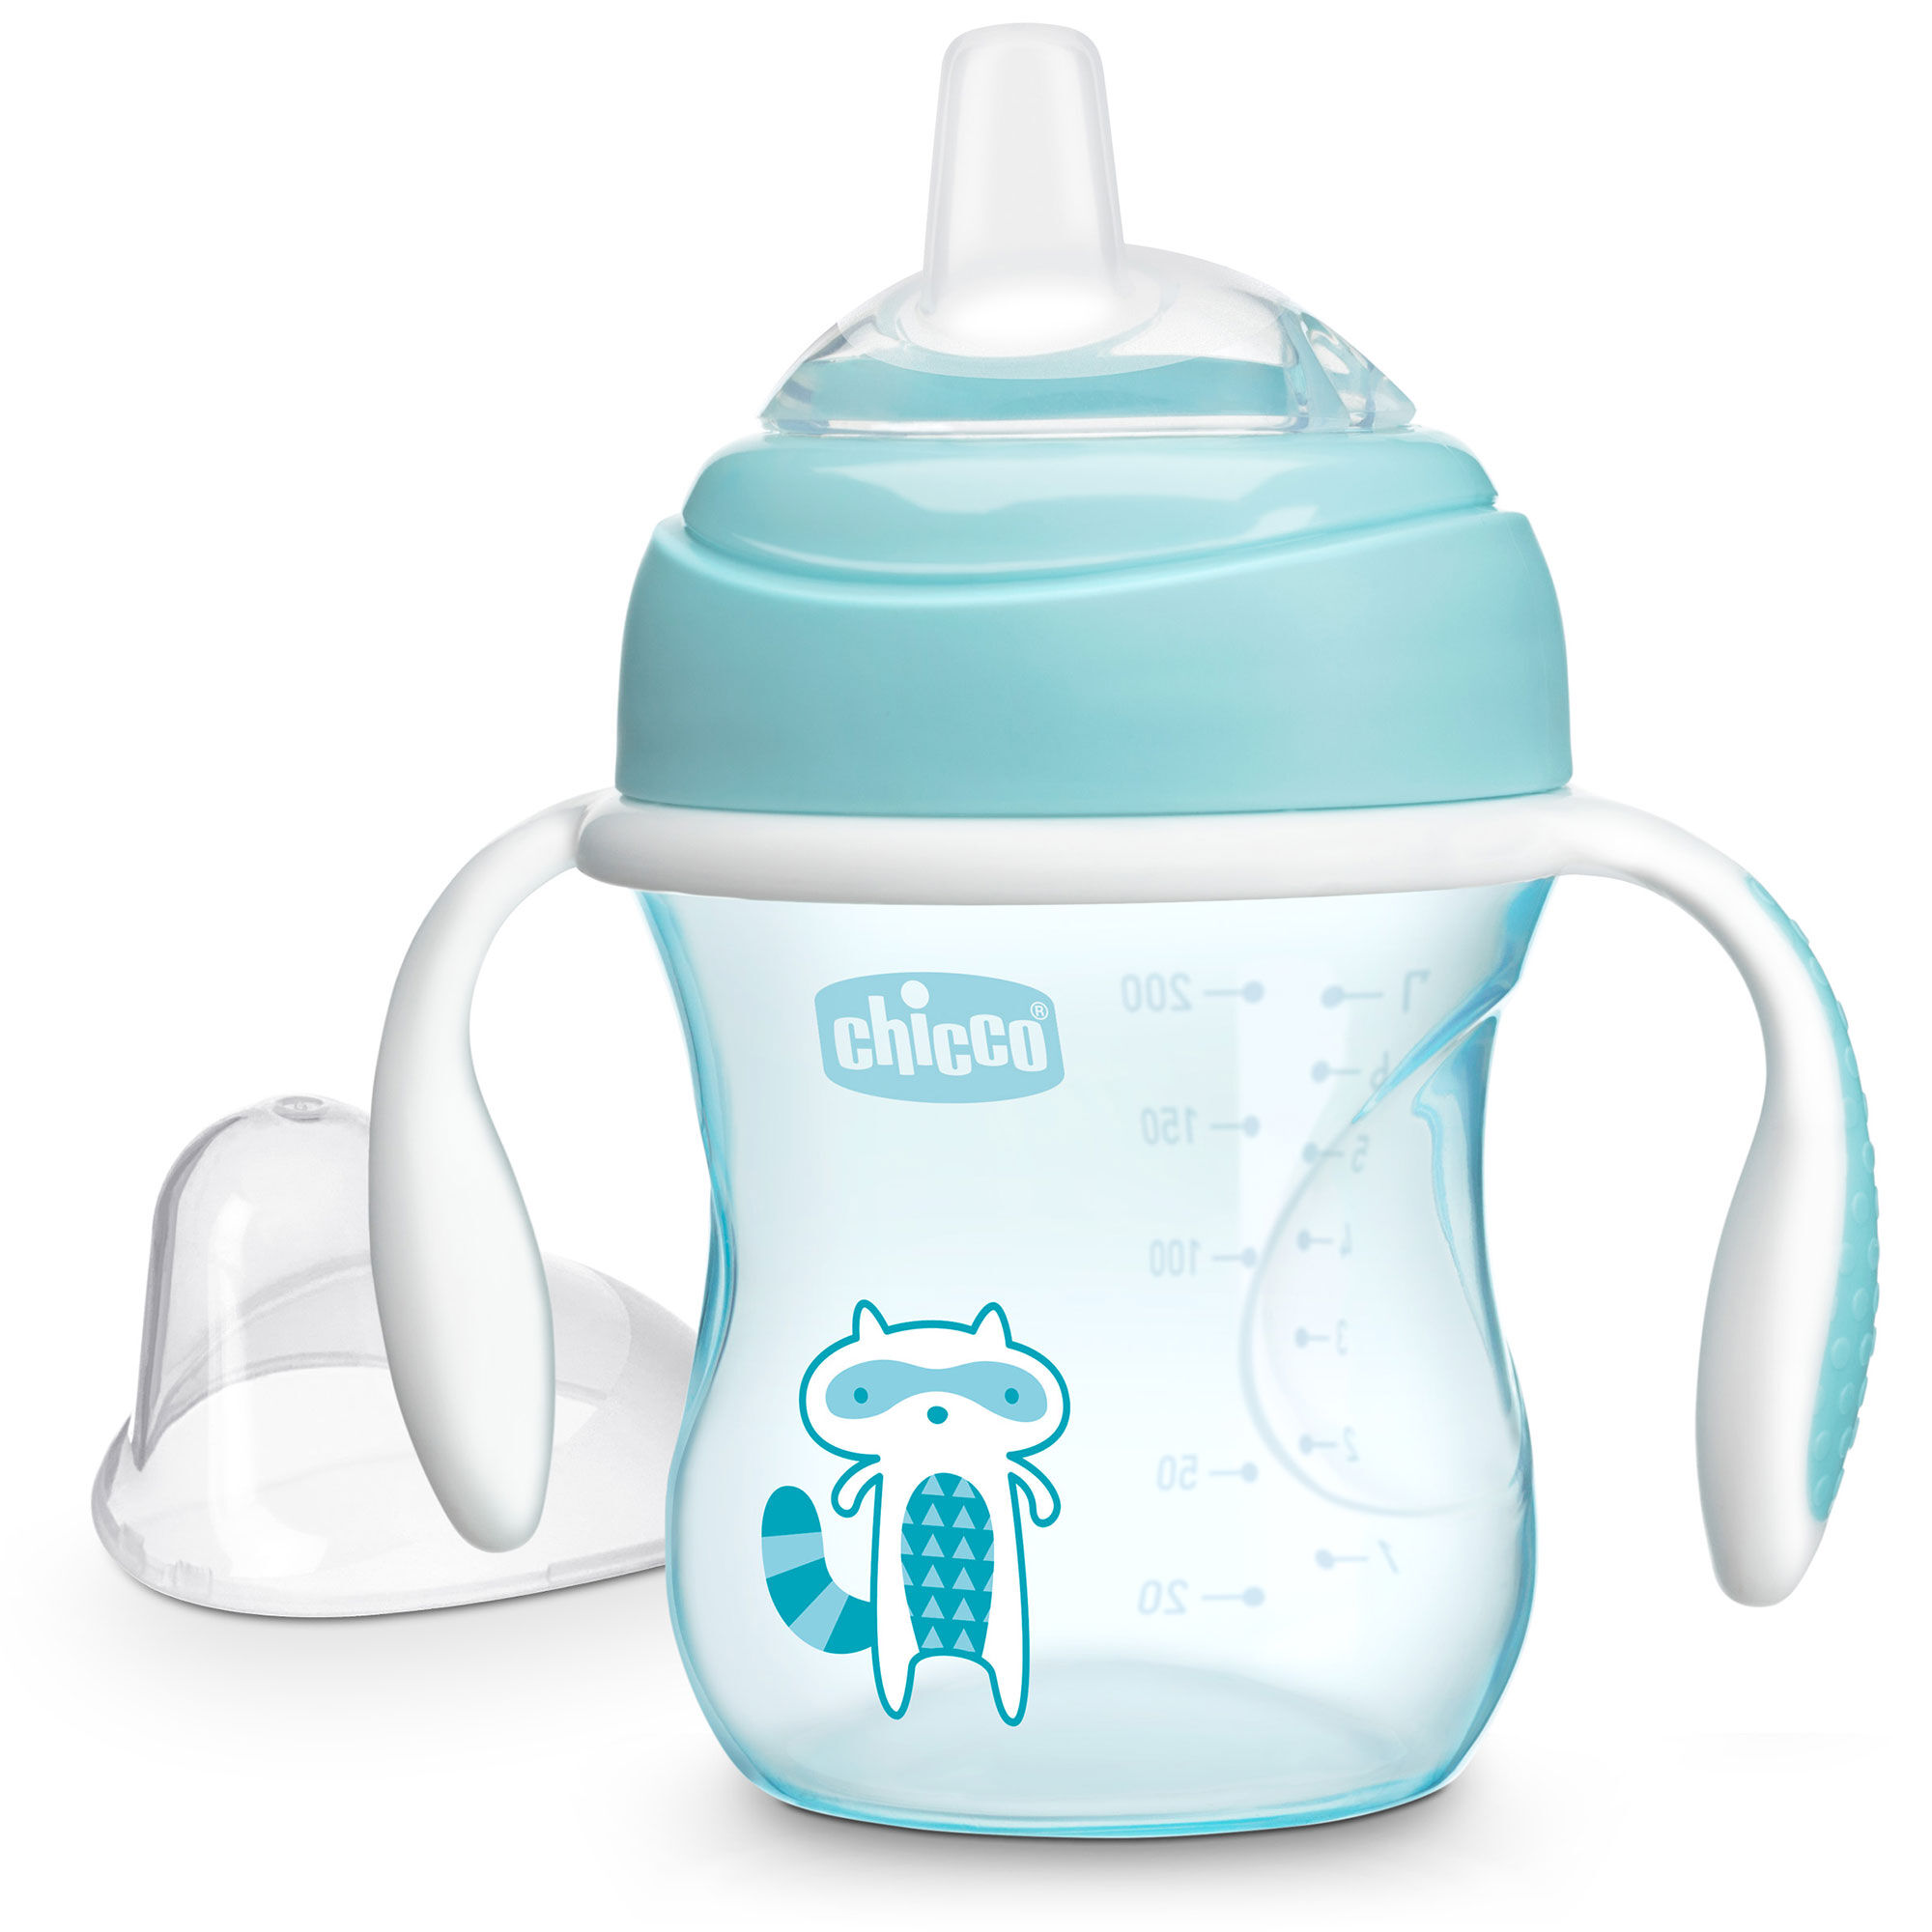 switching from bottle to sippy cup